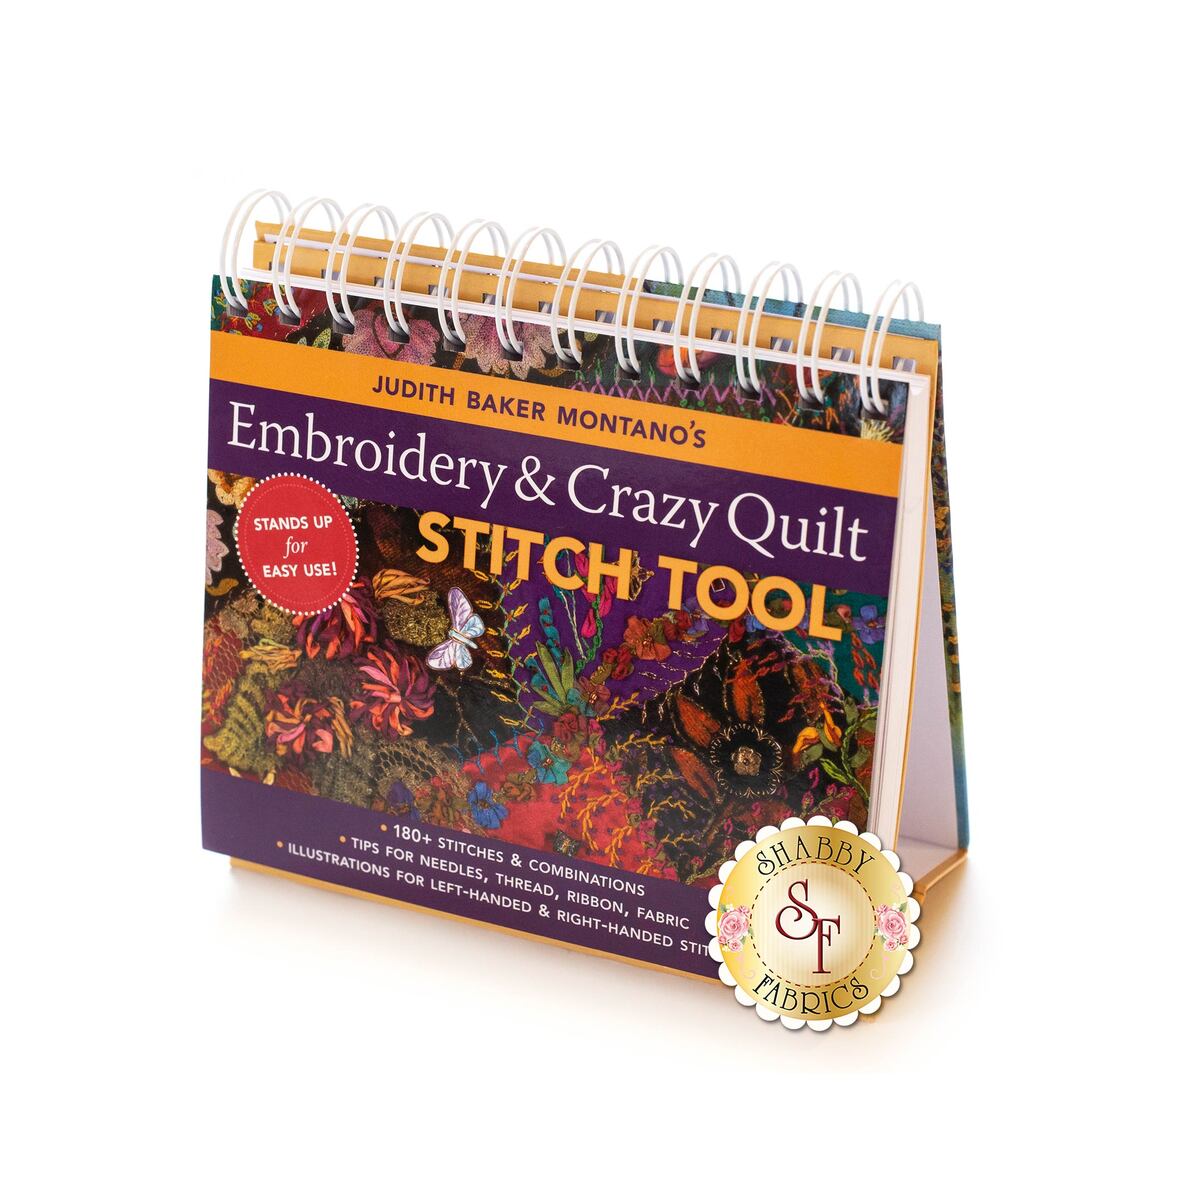 Hand Embroidery Essentials Guide (Second Edition) - Digital